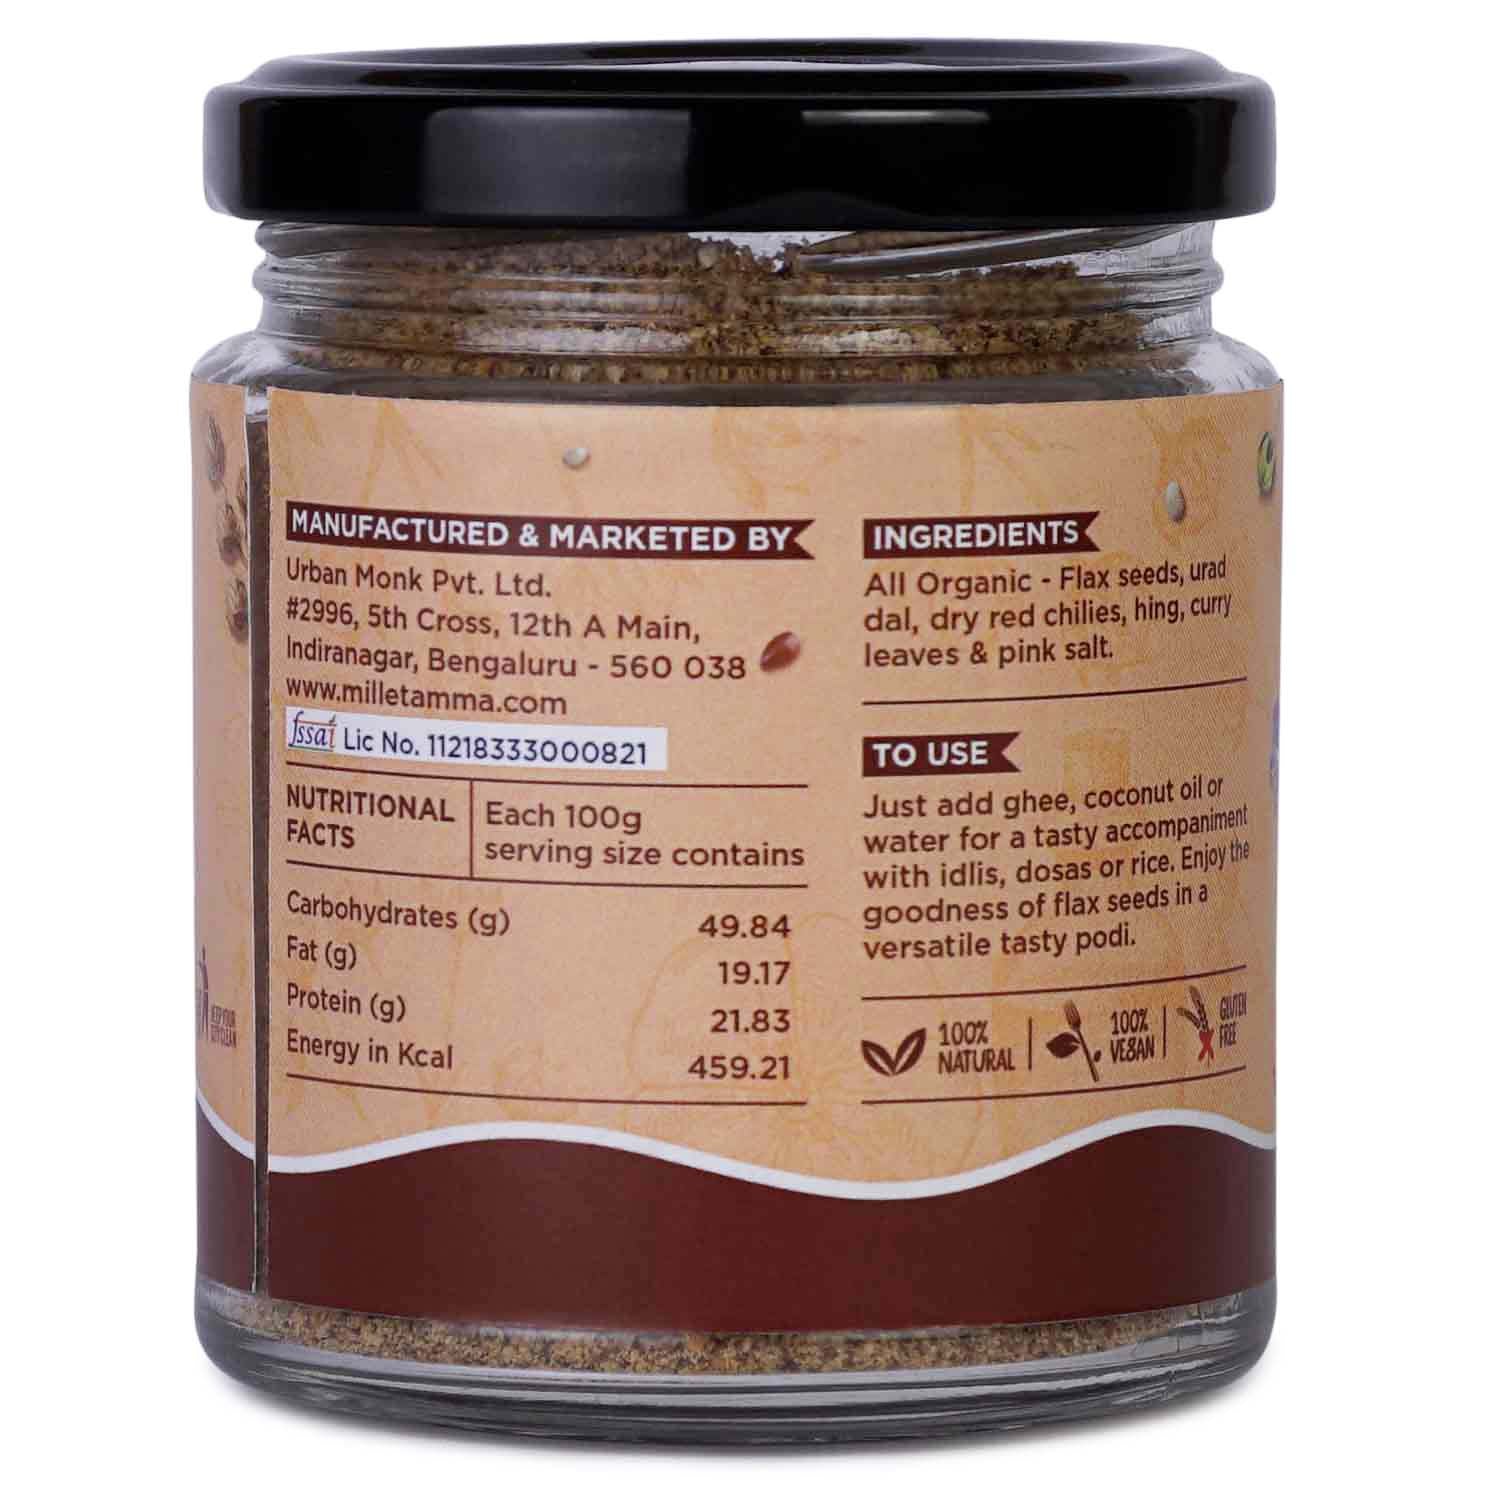 Millet Amma’s  Flax Seed Podi- Introducing to you Millet Amma’s nutty Flax Seed Podi. Flax seeds are usually gummy and have a peculiar taste but are very healthy and it is important to incorporate it in our diet.